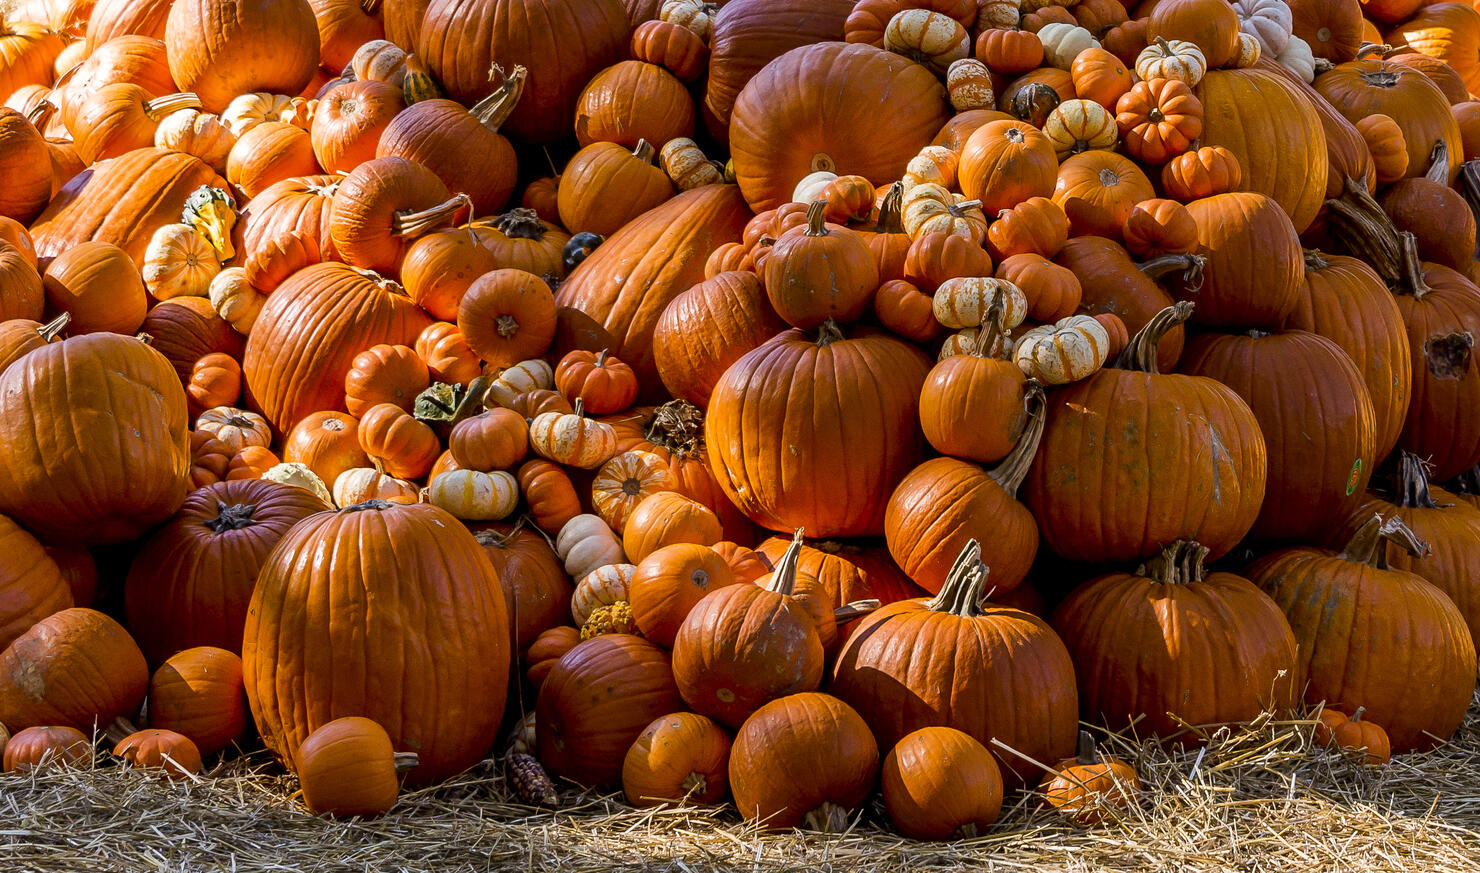 October 11, 2017, Dallas, Texas, USA:  A beautiful display of pumpkins and gourds are presented at the city Halloween display in Dallas, Texas.